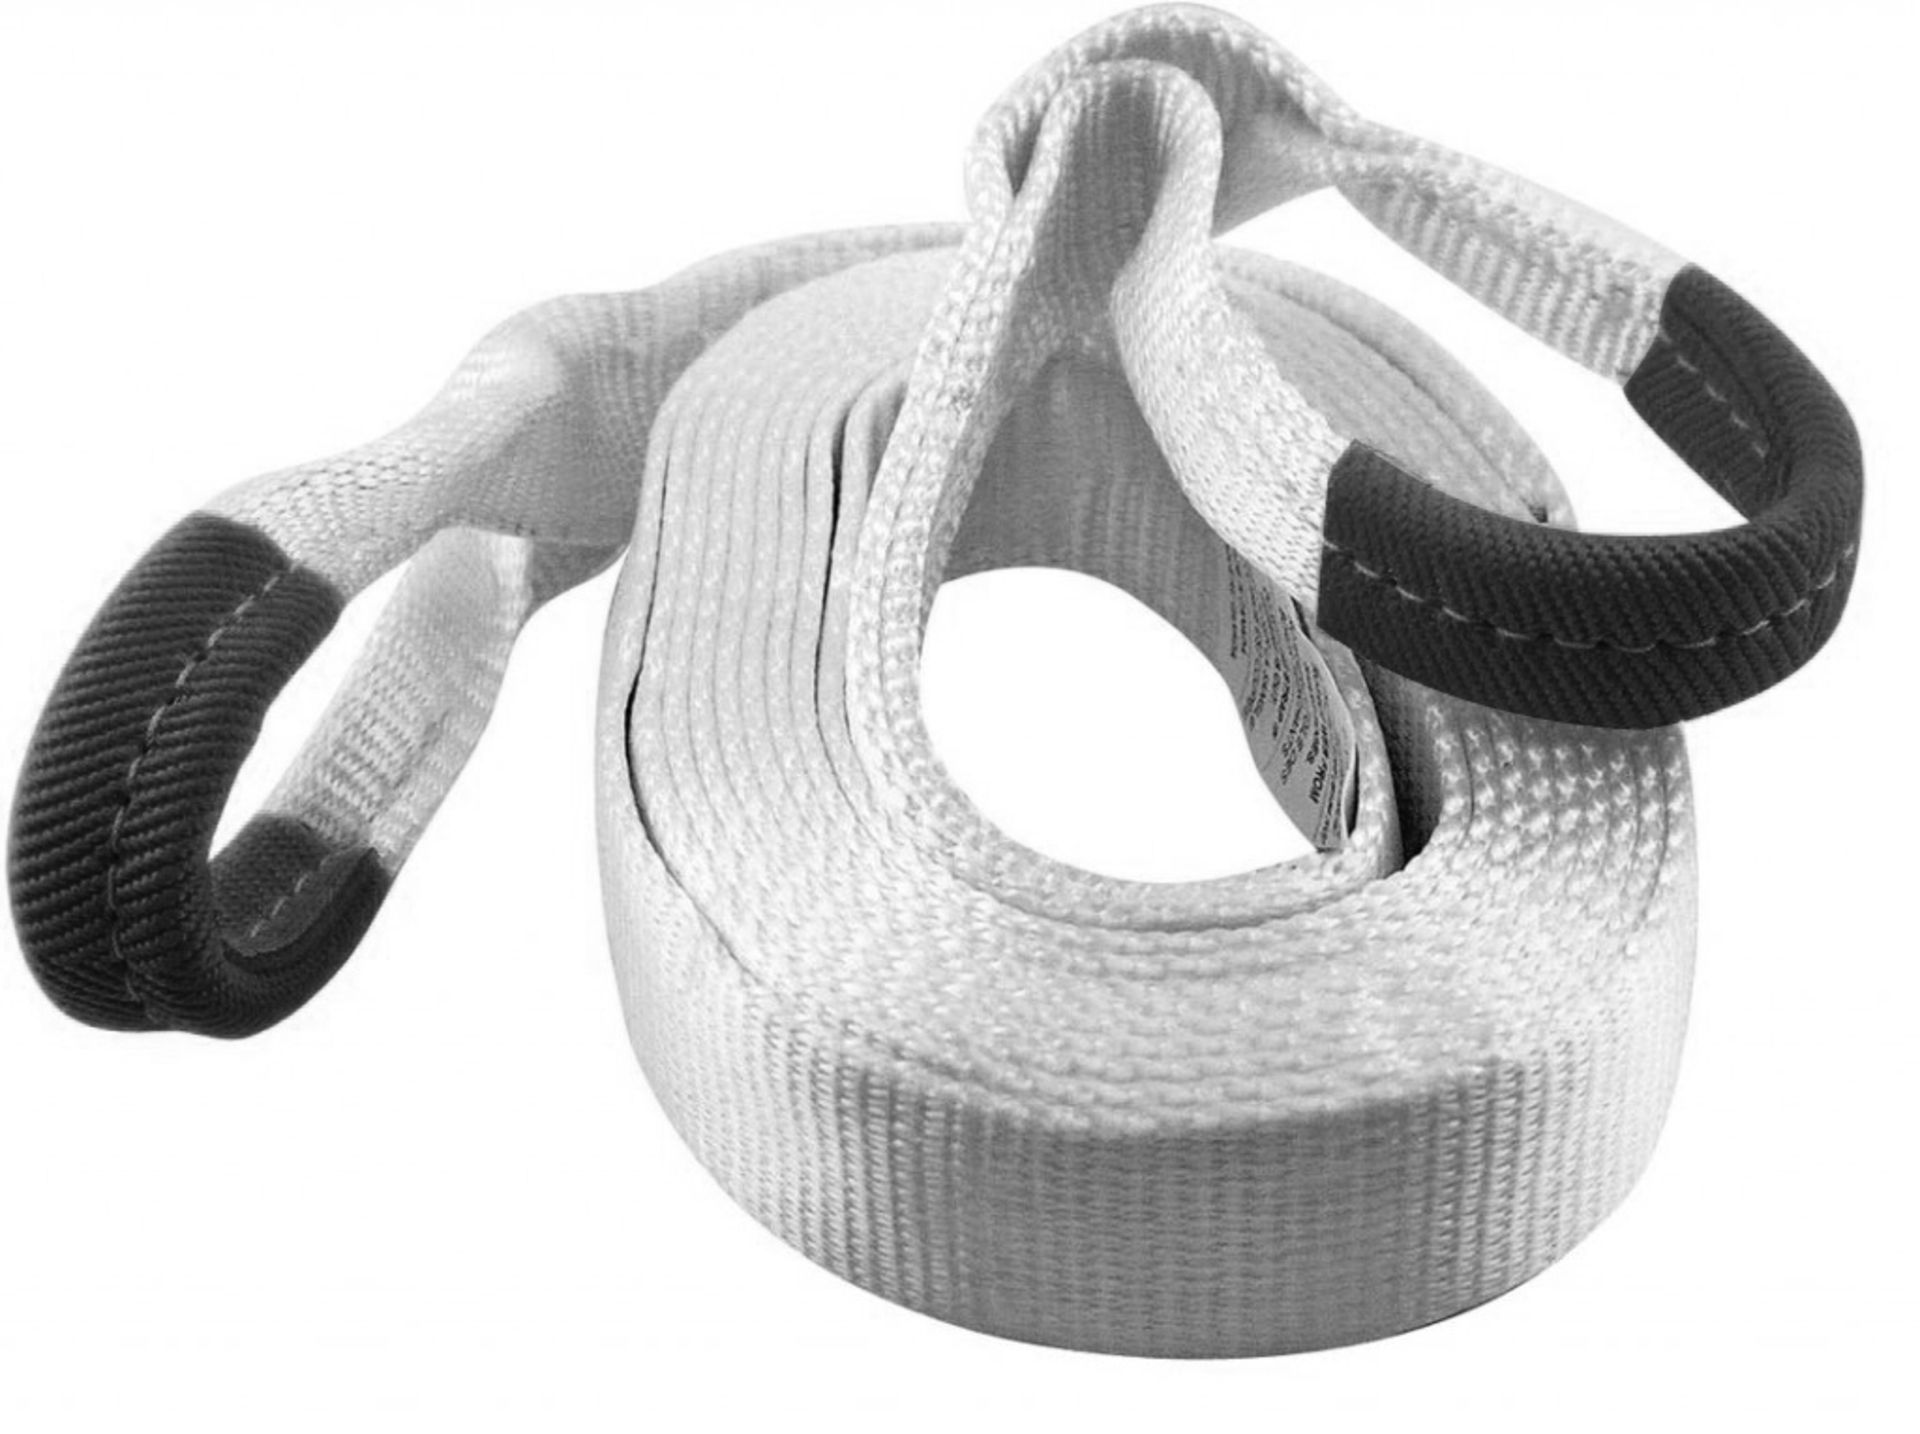 "NEW" (qty - 4) Heavy Duty Tow Strap- 3" x 30' 27,000 Lb Breaking Strength 13,500 Max Vehicle Weight